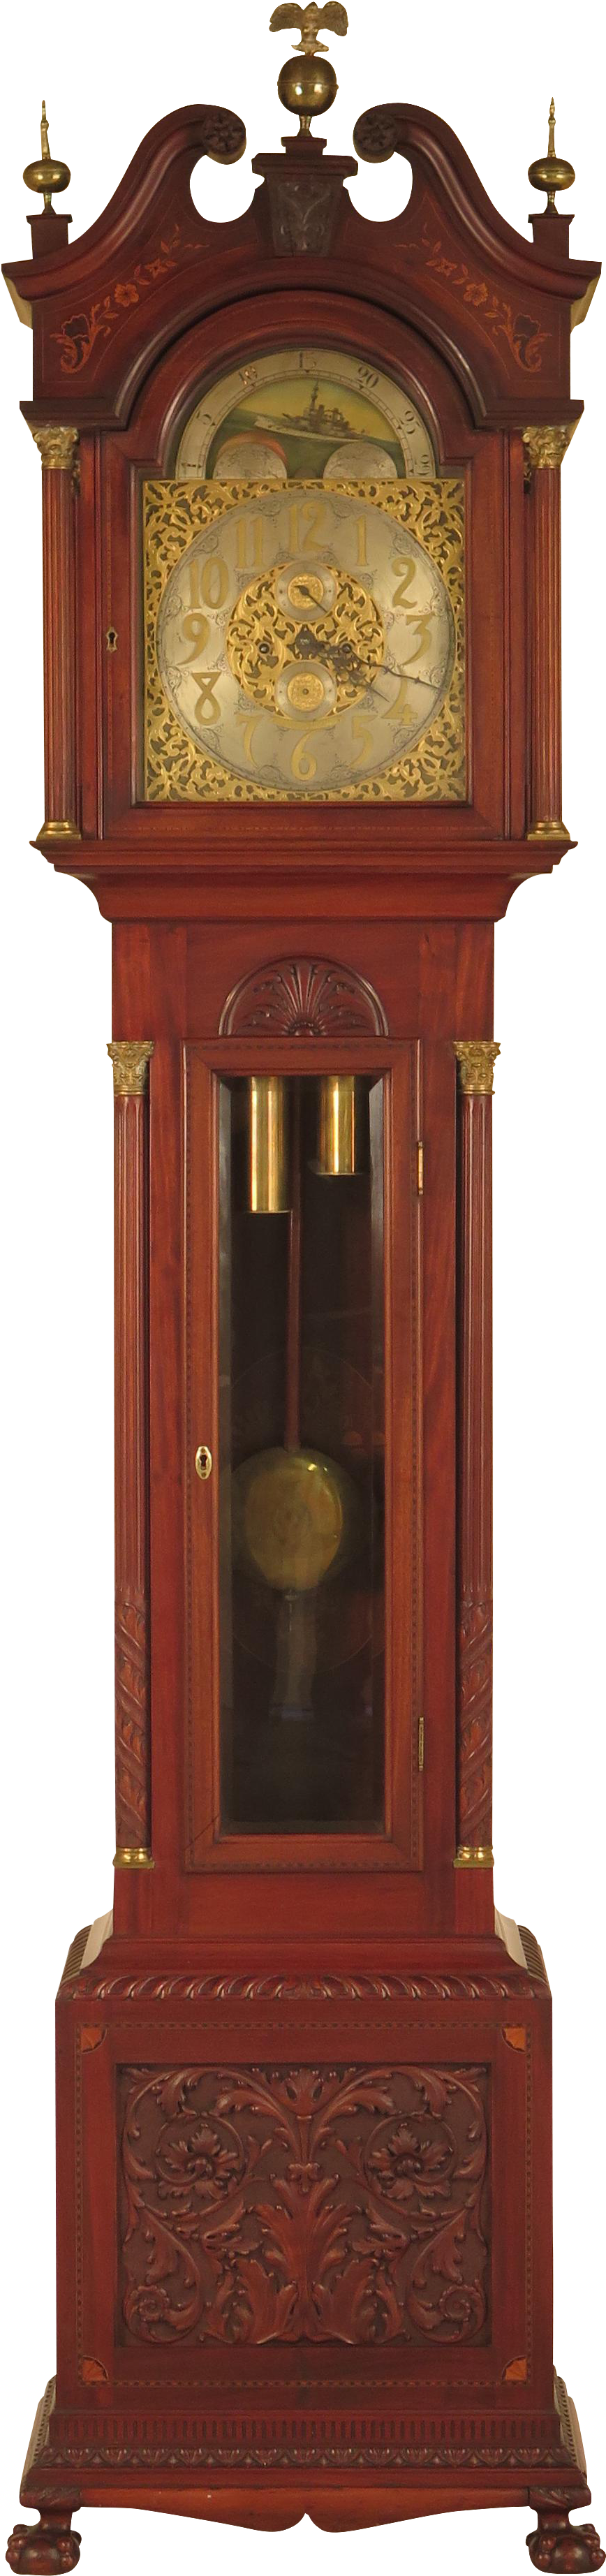 Grandfather Clock Png Picture - Hermle Grandmother Clock (963x4098), Png Download